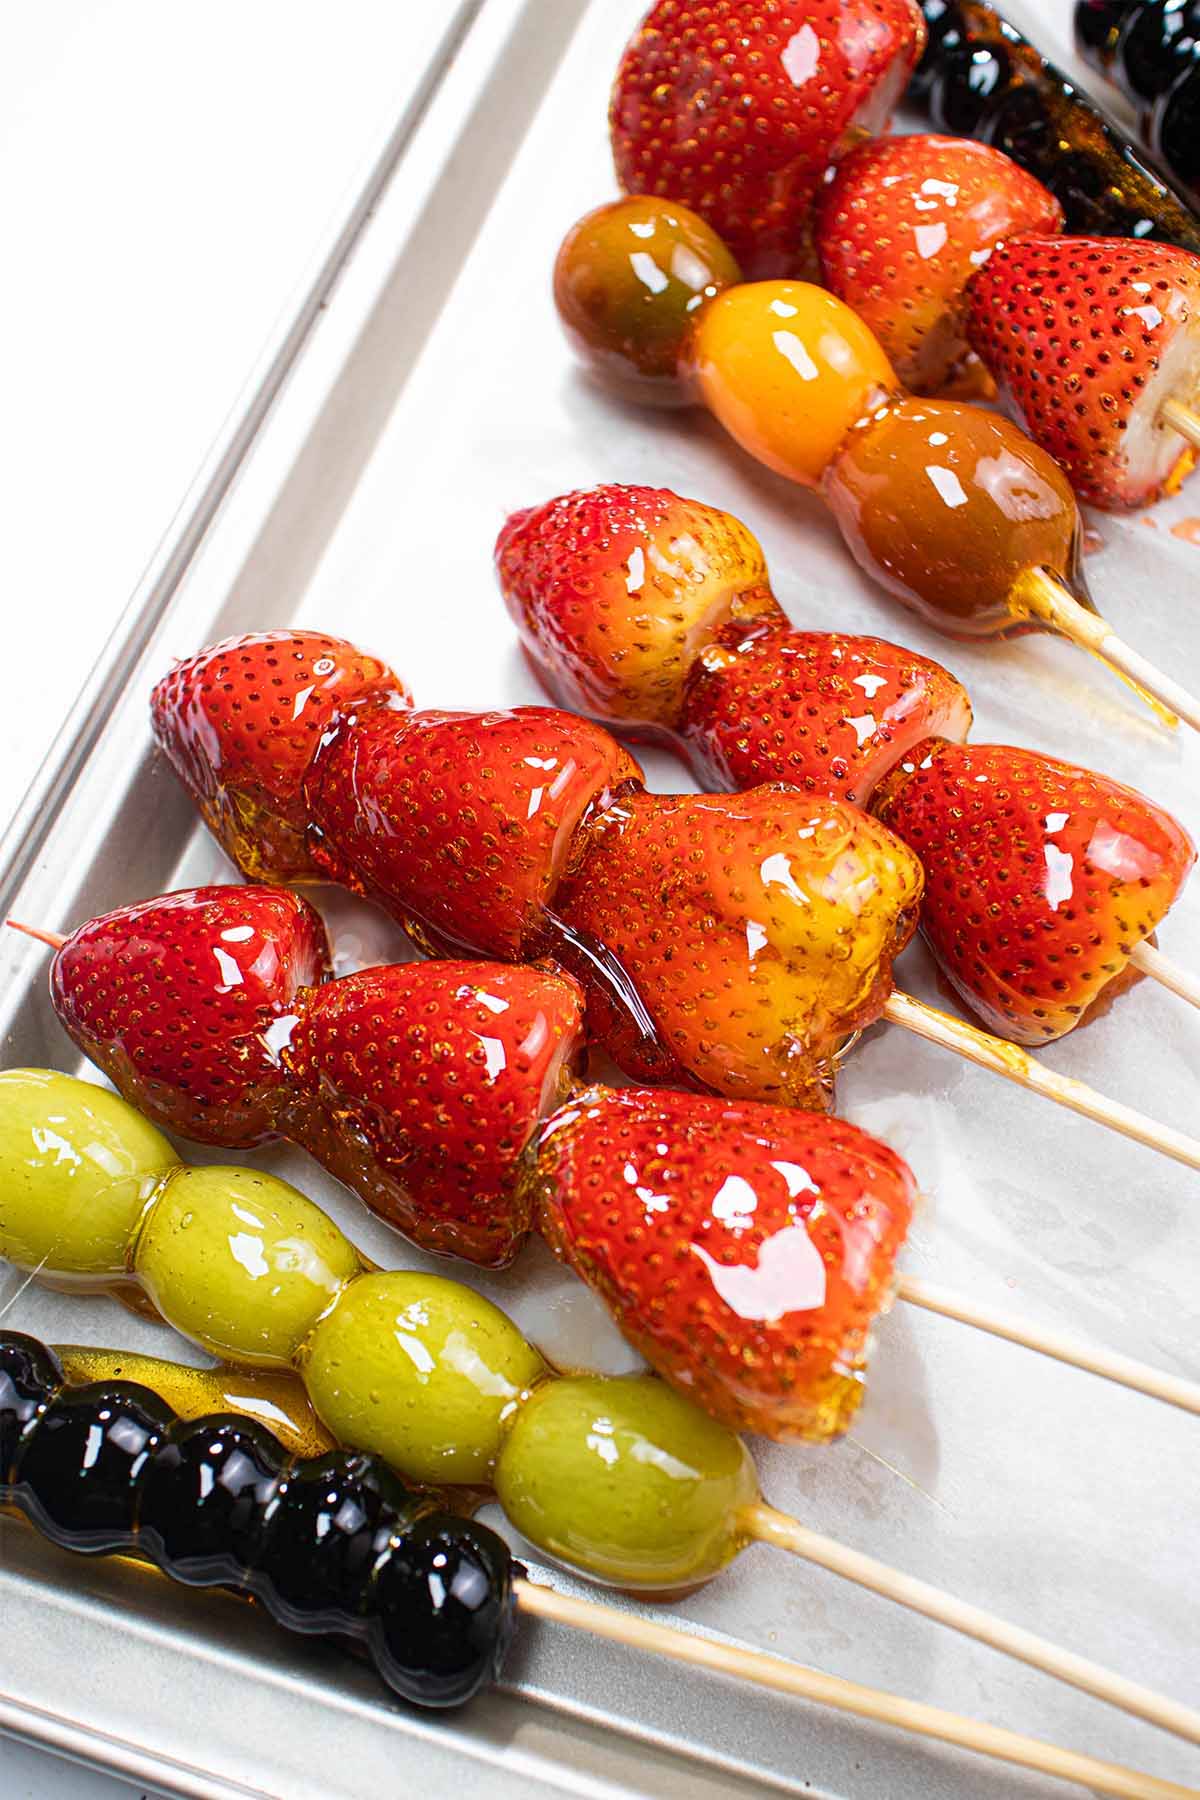 Skewers of Tanghulu Chinese candied fruit on a baking sheet including skewers of strawberries, grapes, and blueberries.